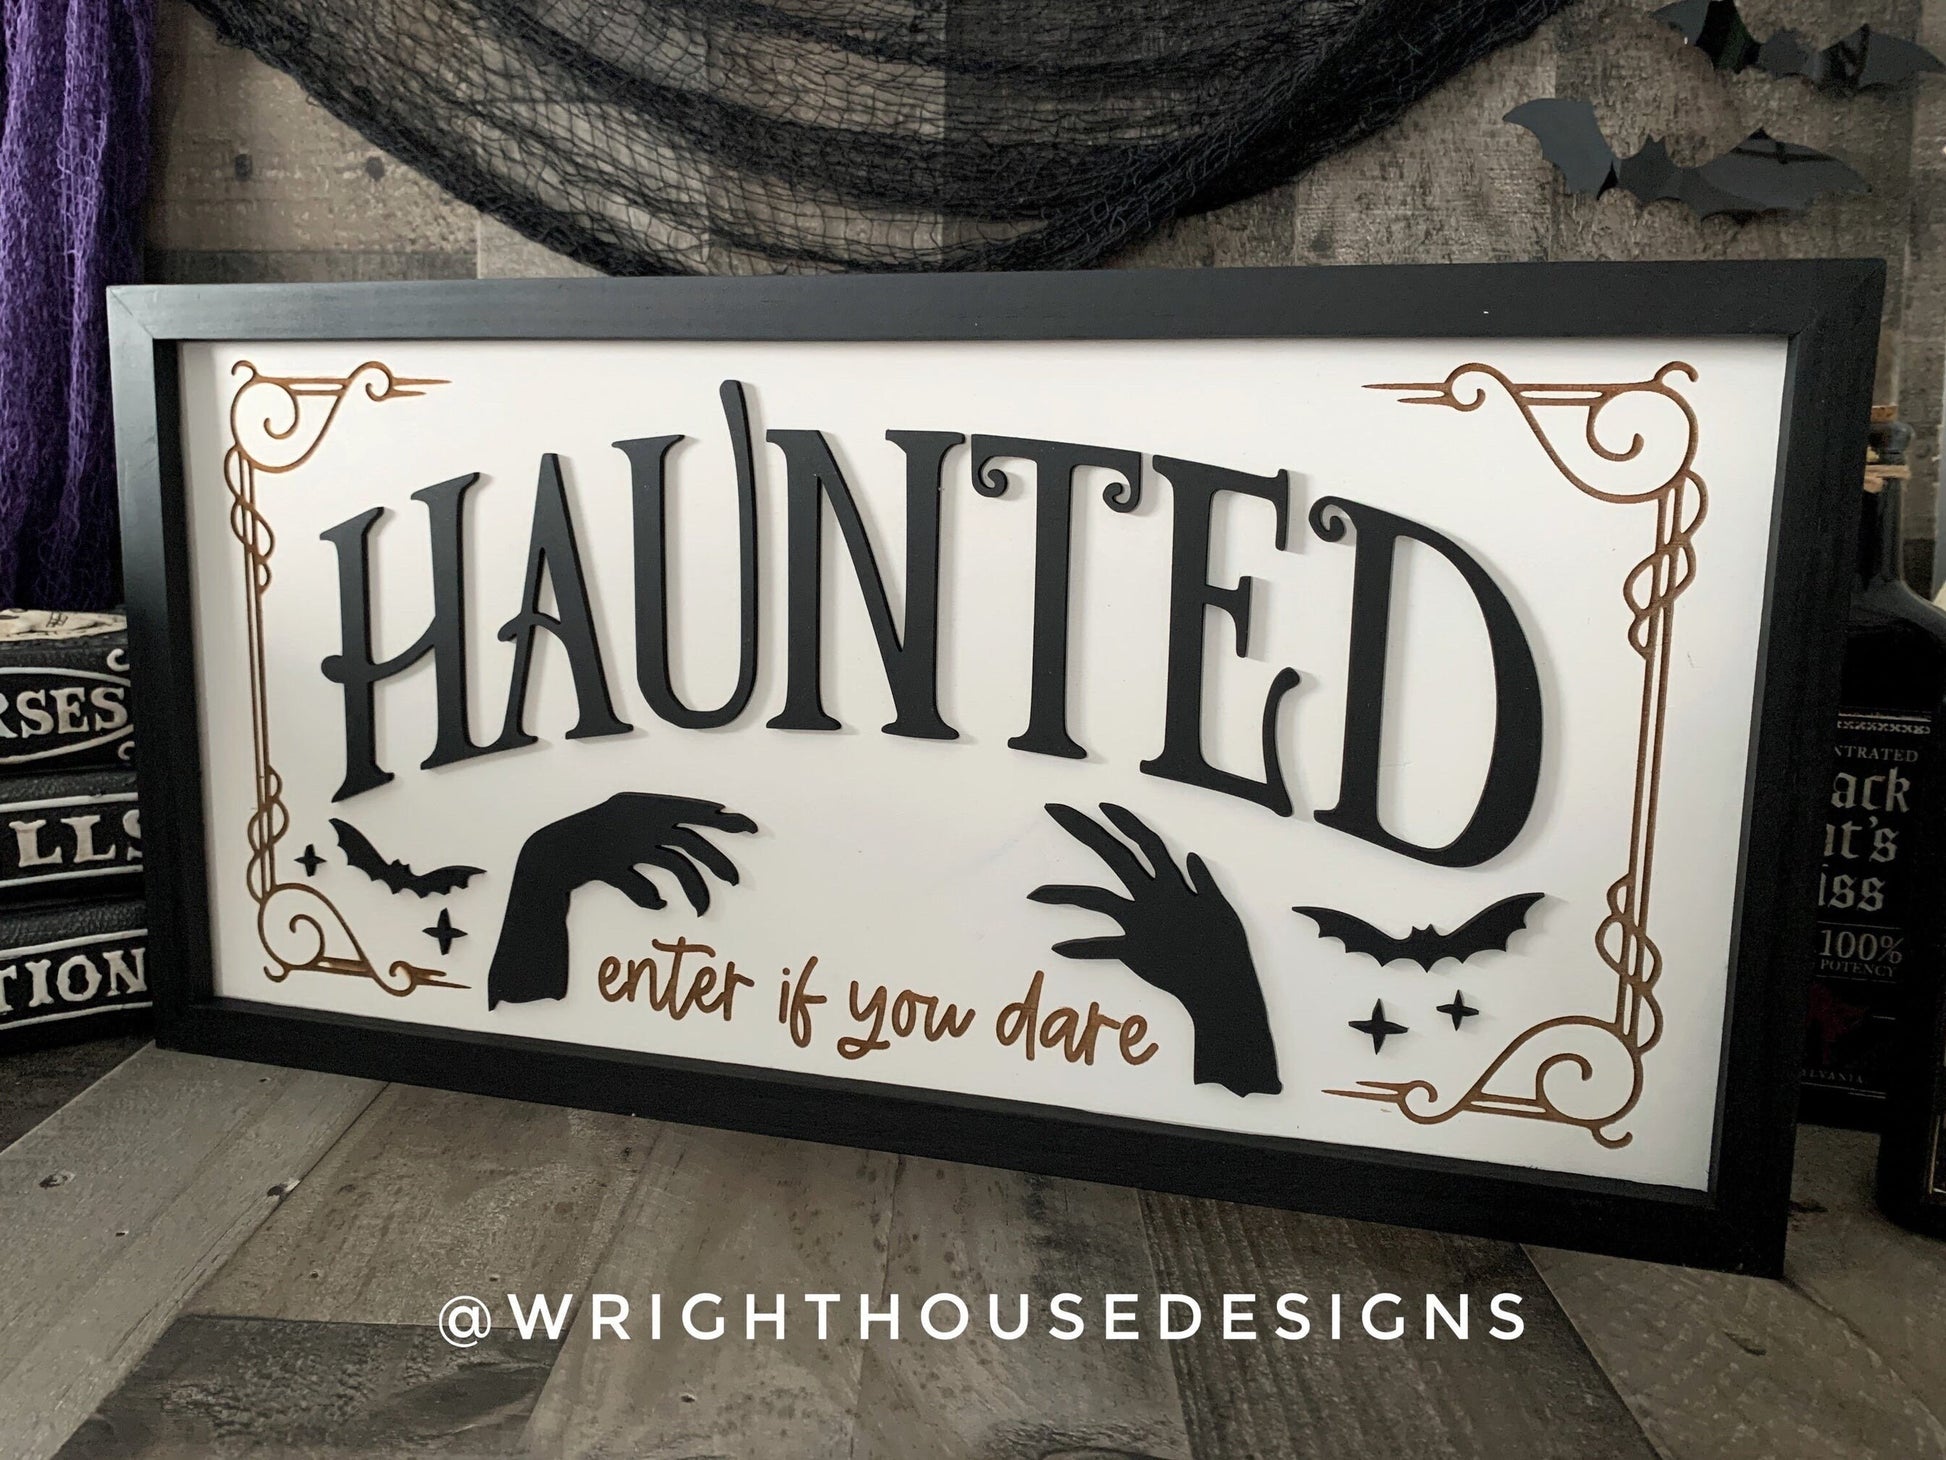 Haunted Enter If You Dare - Halloween Witchy Room Decor - Spooky Season Coffee Bar Sign - Dark Academia - Cottagecore Framed Wooden Wall Art